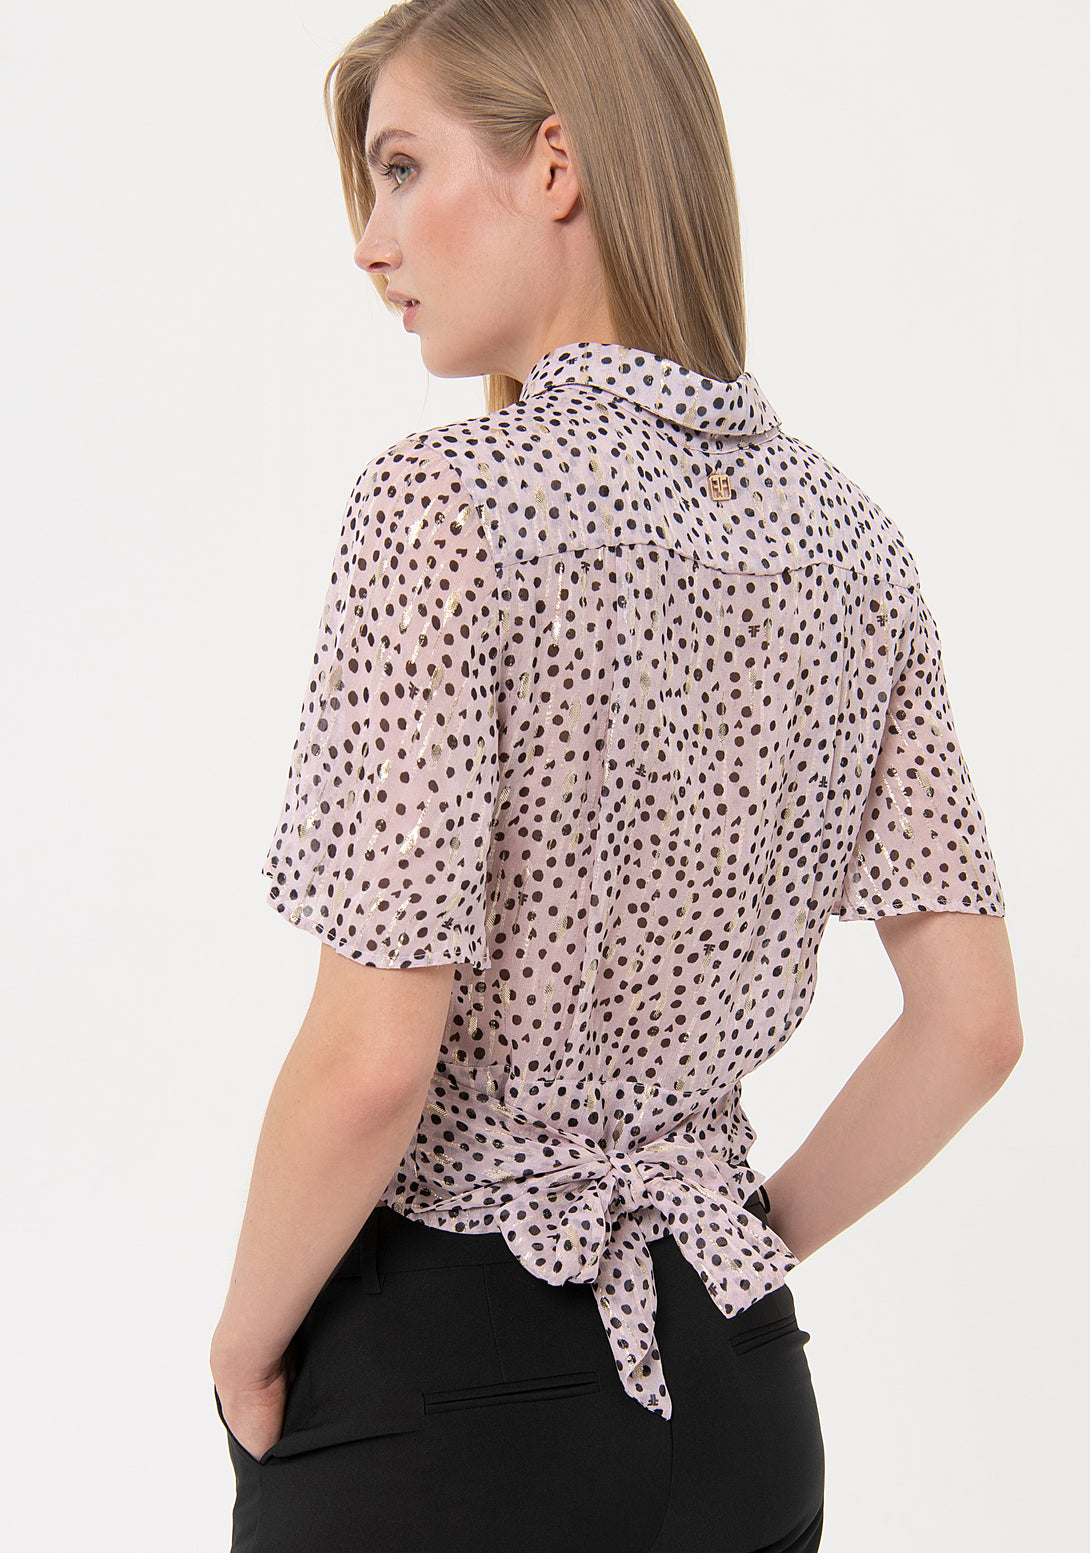 hirt cropped with polka dots pattern Fracomina FR24ST6022W689R8-S36-3